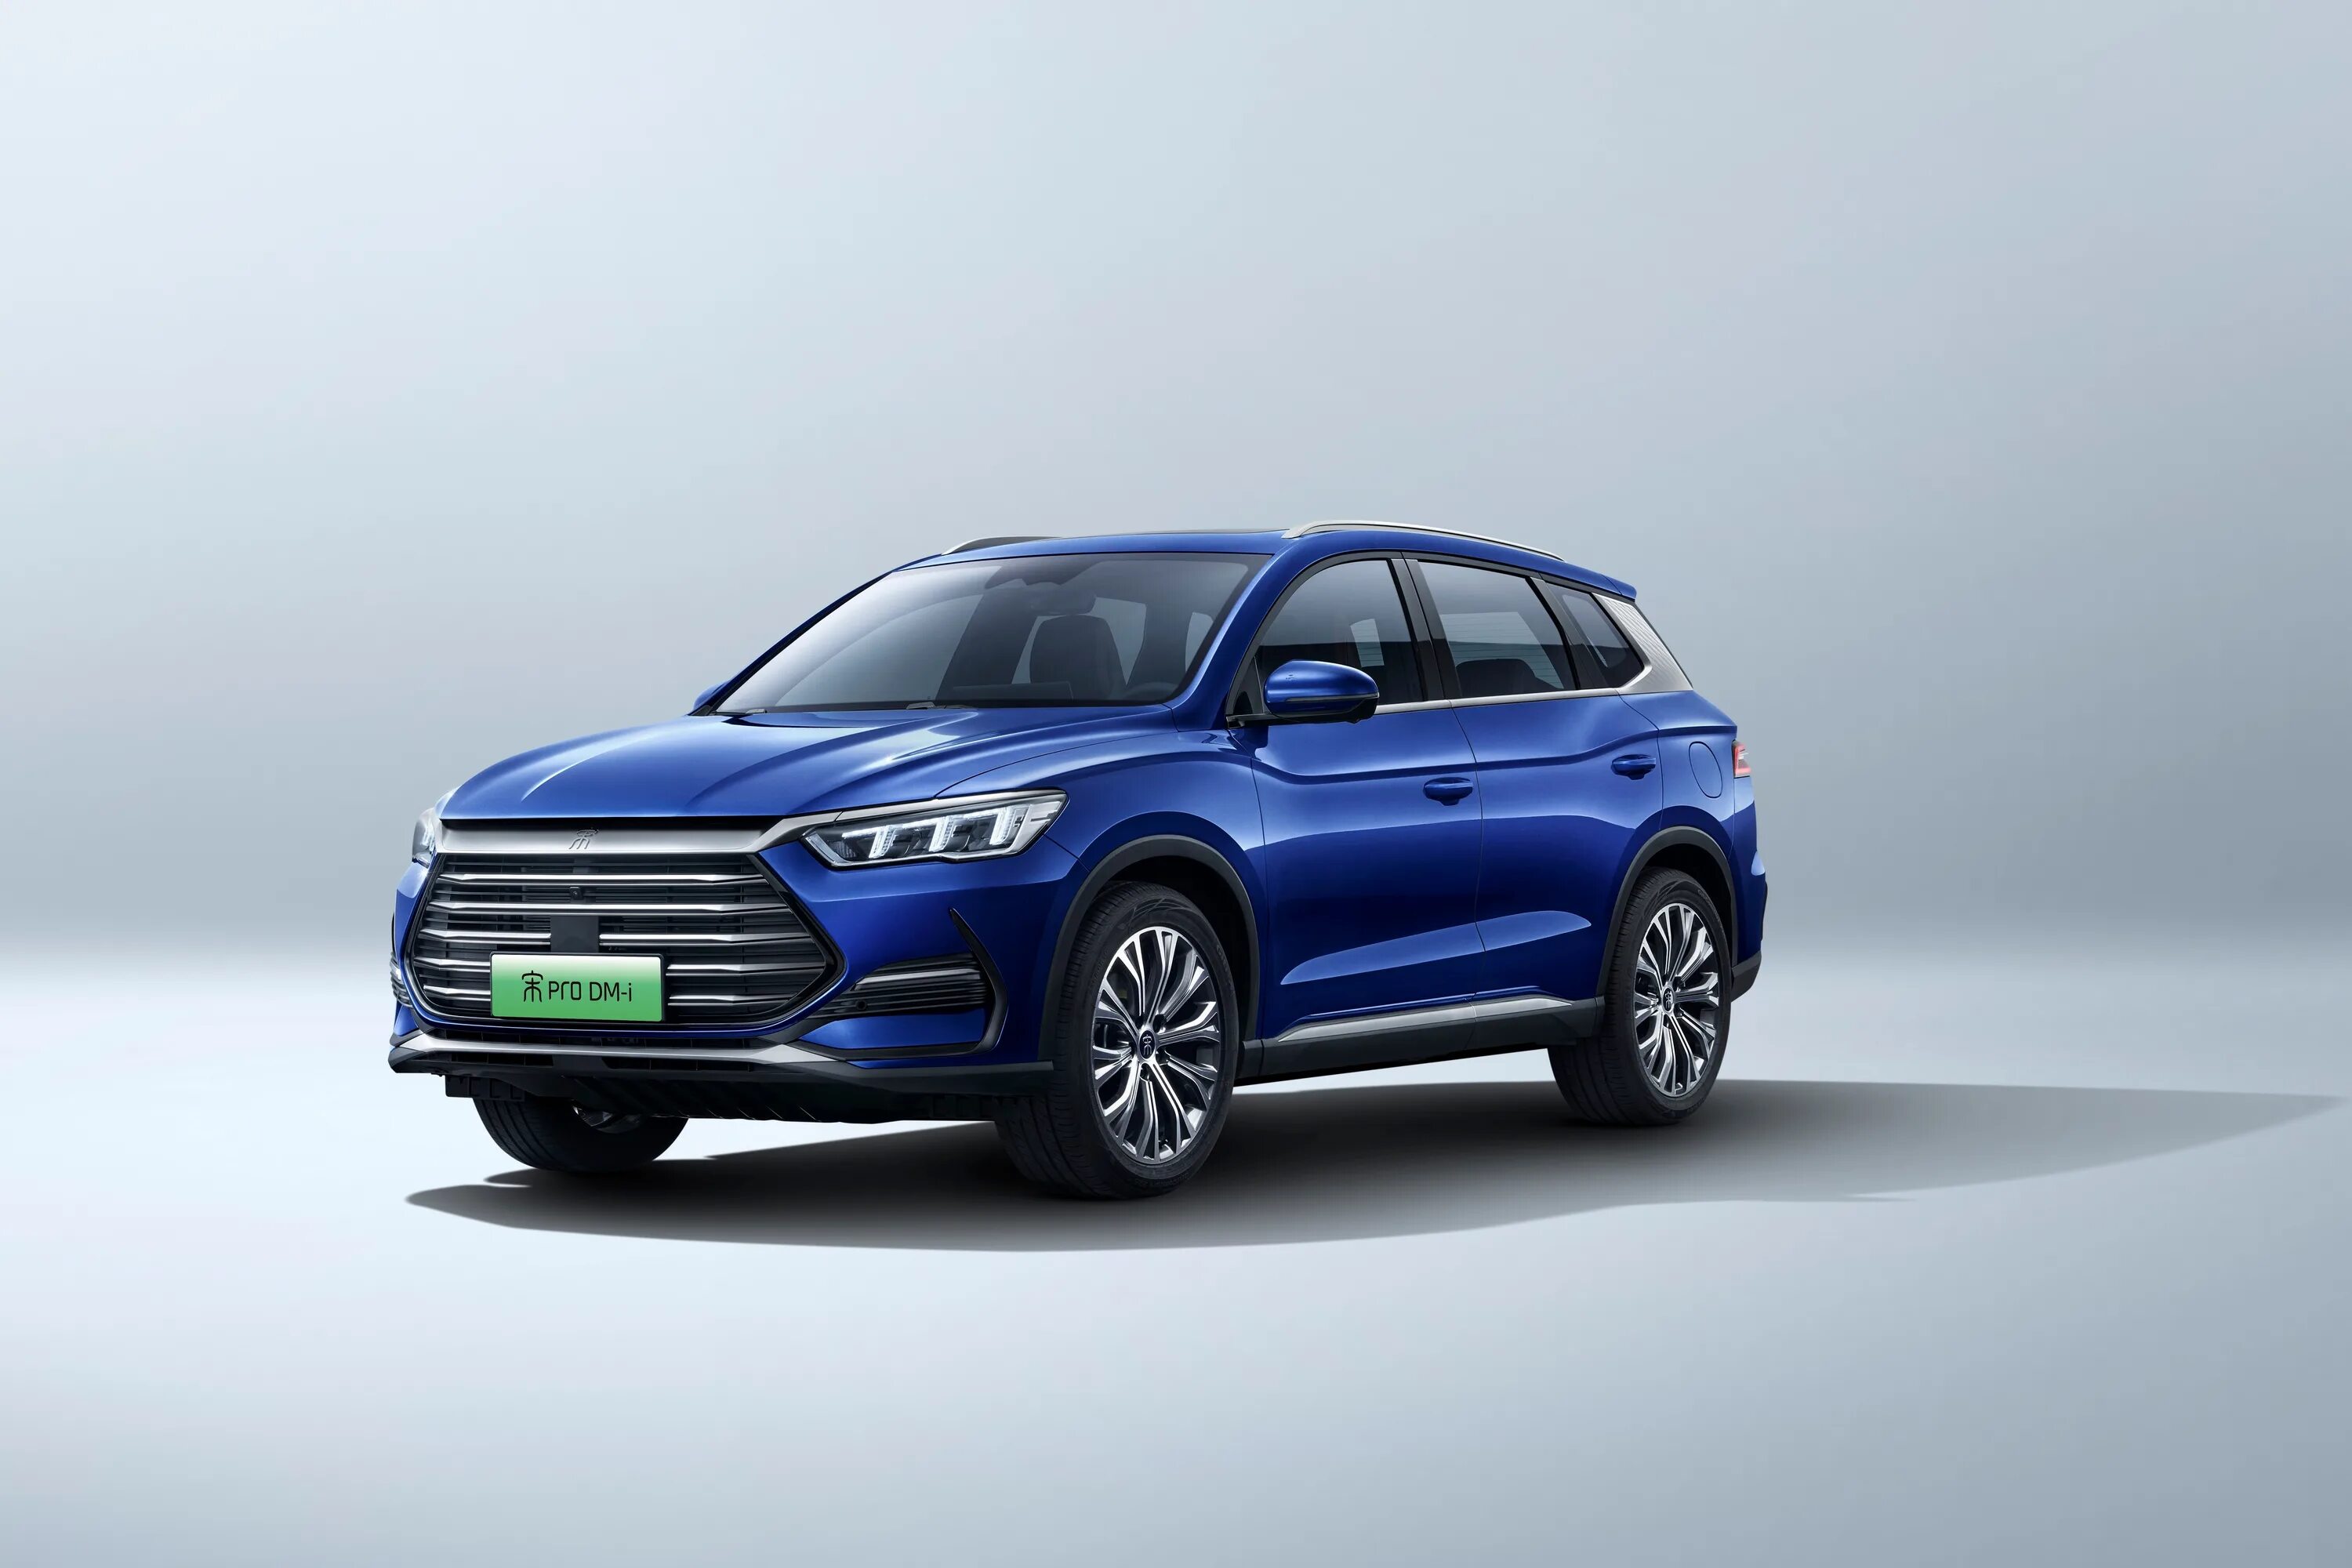 Byd song plus гибрид. BYD Song Pro DM-I 2022. BYD Song 2022. BYD кроссовер 2022. BYD кроссовер 2023.